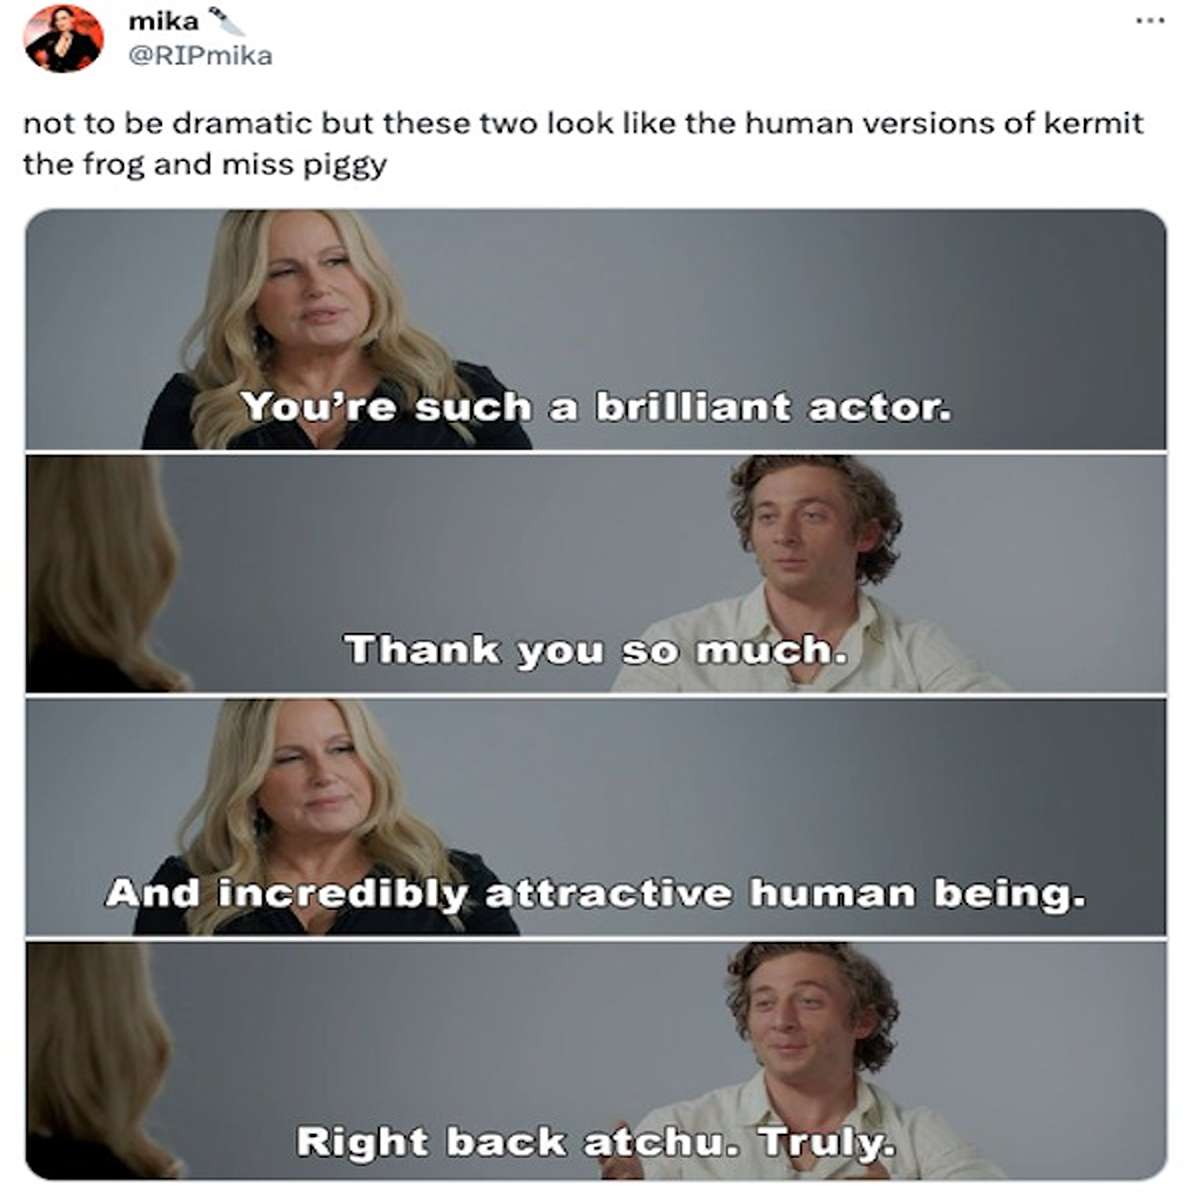 funny tweets and memes - conversation - mika not to be dramatic but these two look the human versions of kermit the frog and miss piggy You're such a brilliant actor. Thank you so much. And incredibly attractive human being. Right back atchu. Truly.